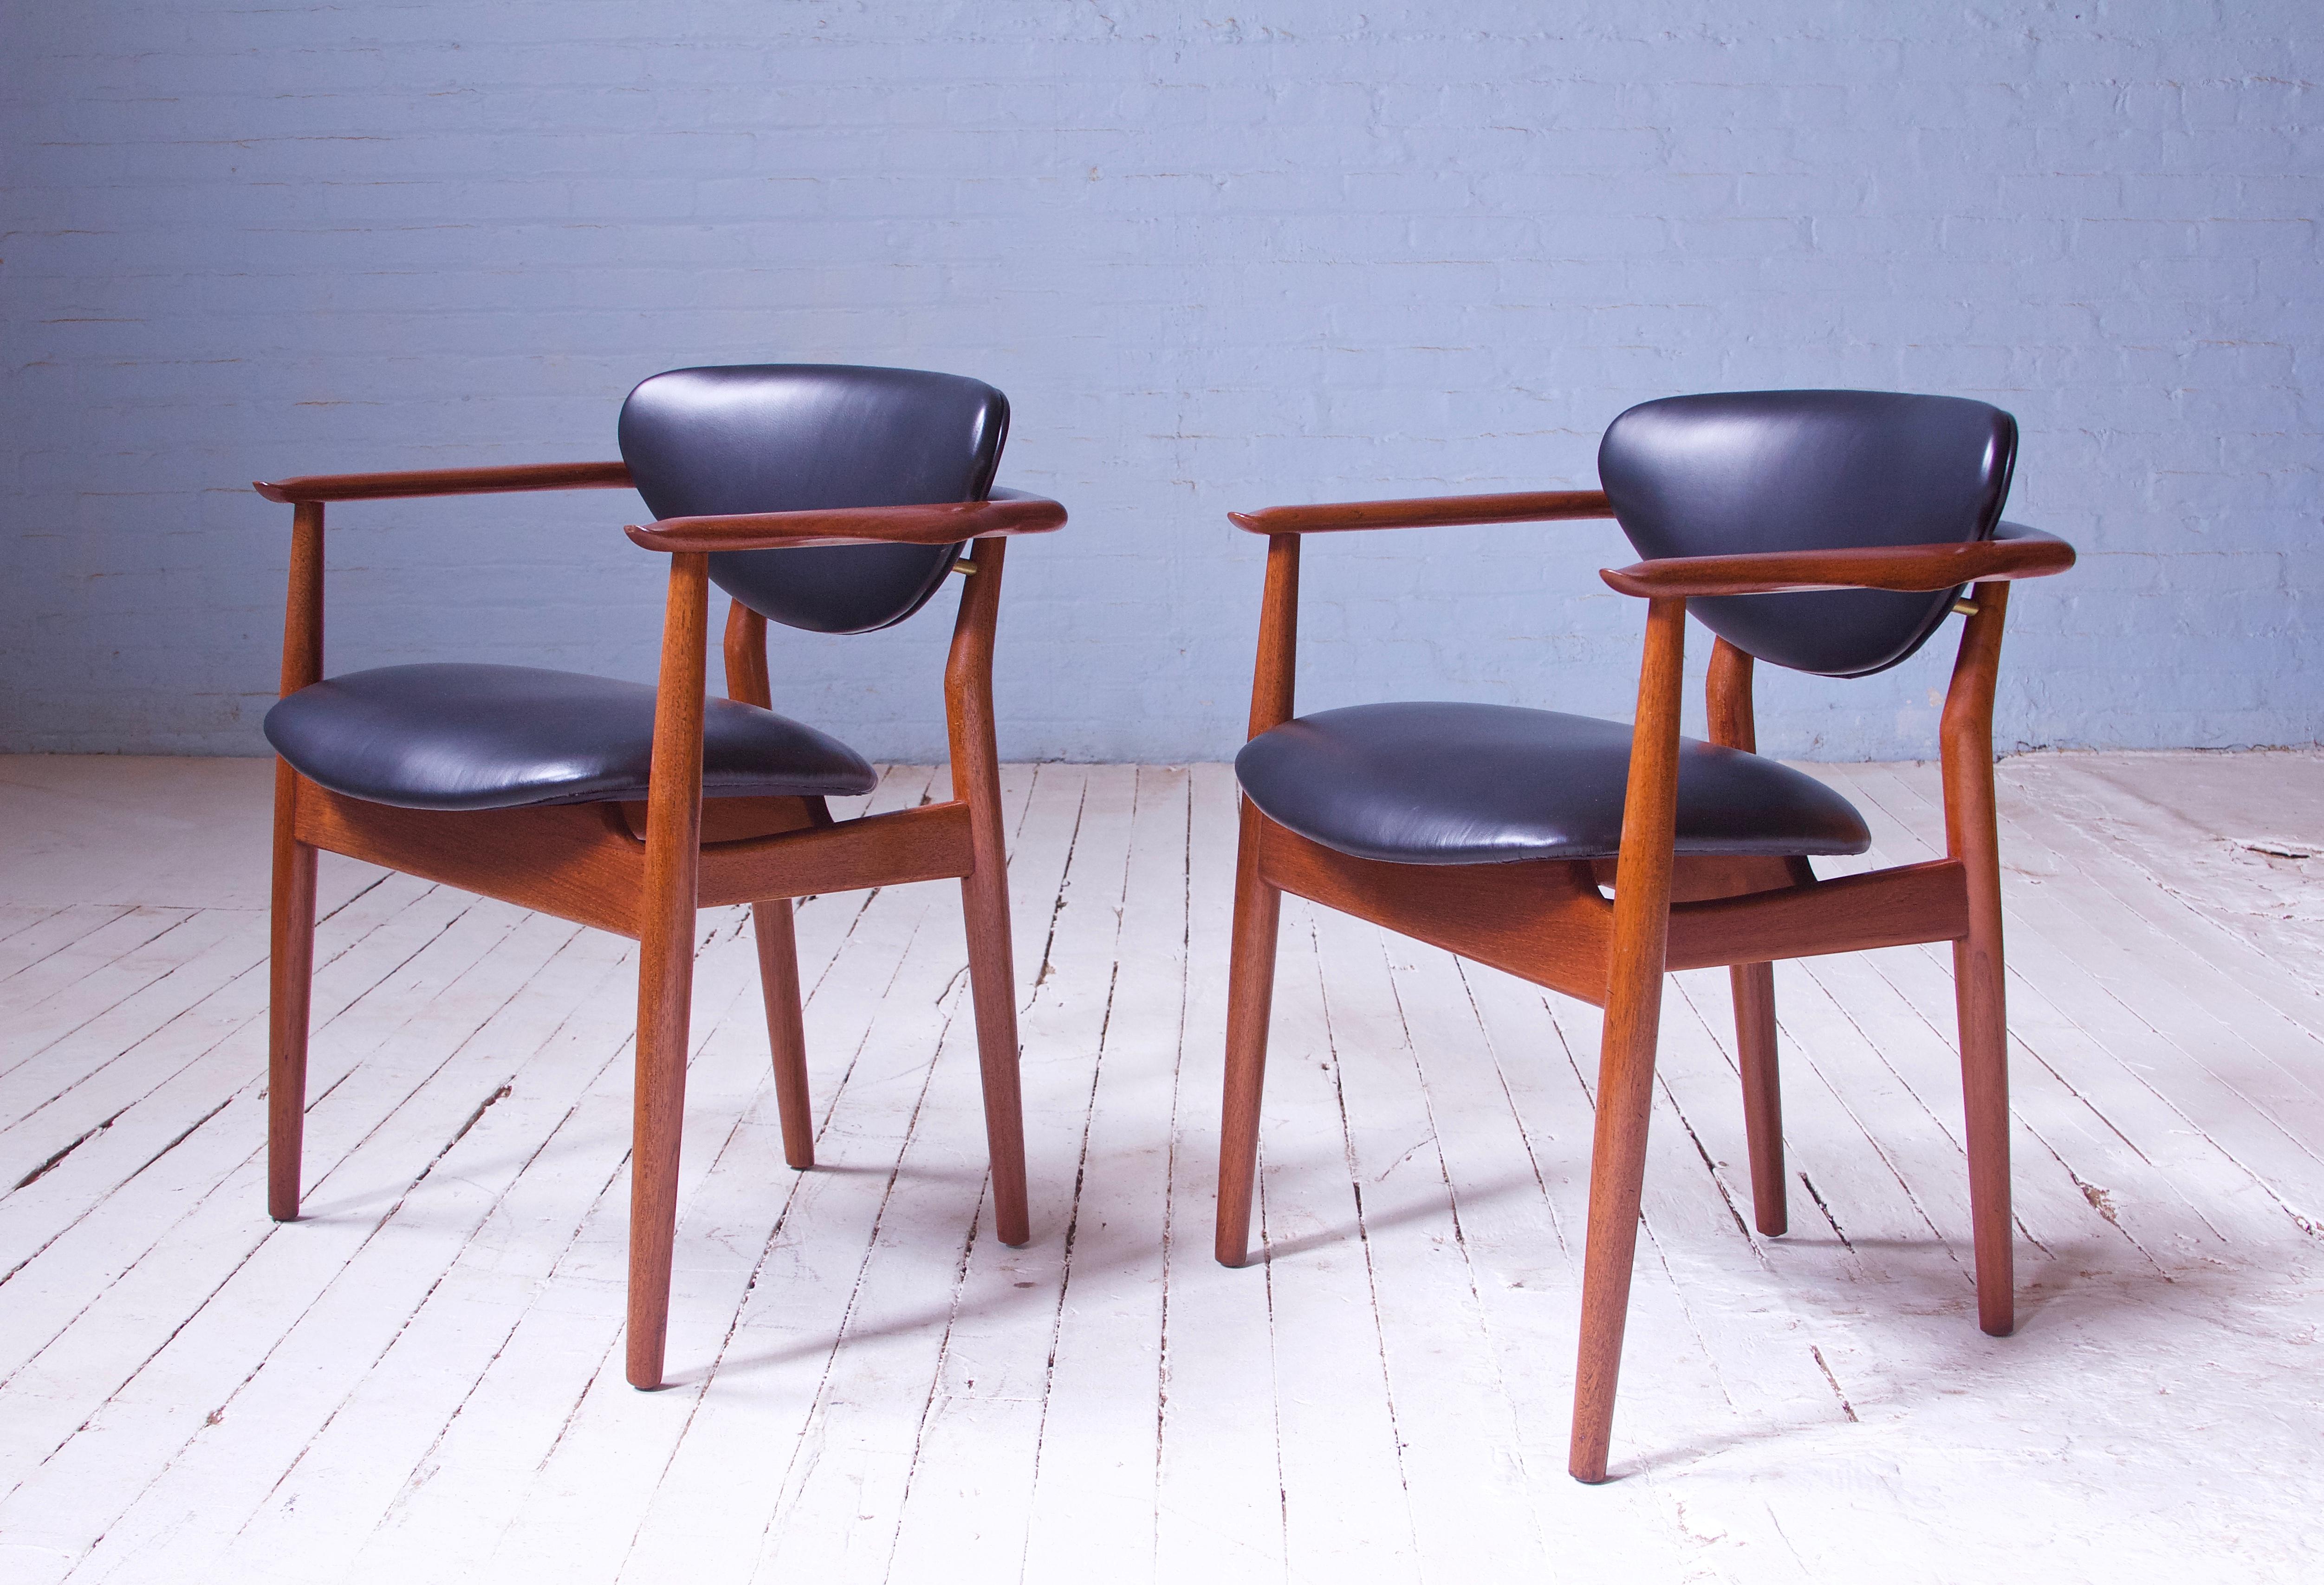 A very rare pair of vintage signed Finn Juhl for Niels Vodder (Cabinetmaker) 109 armchairs in teak, black leather, and brass. Elegantly suspended backrests supported by Finn Juhl's signature brass mounting hardware. Sculpted armrests are delicately